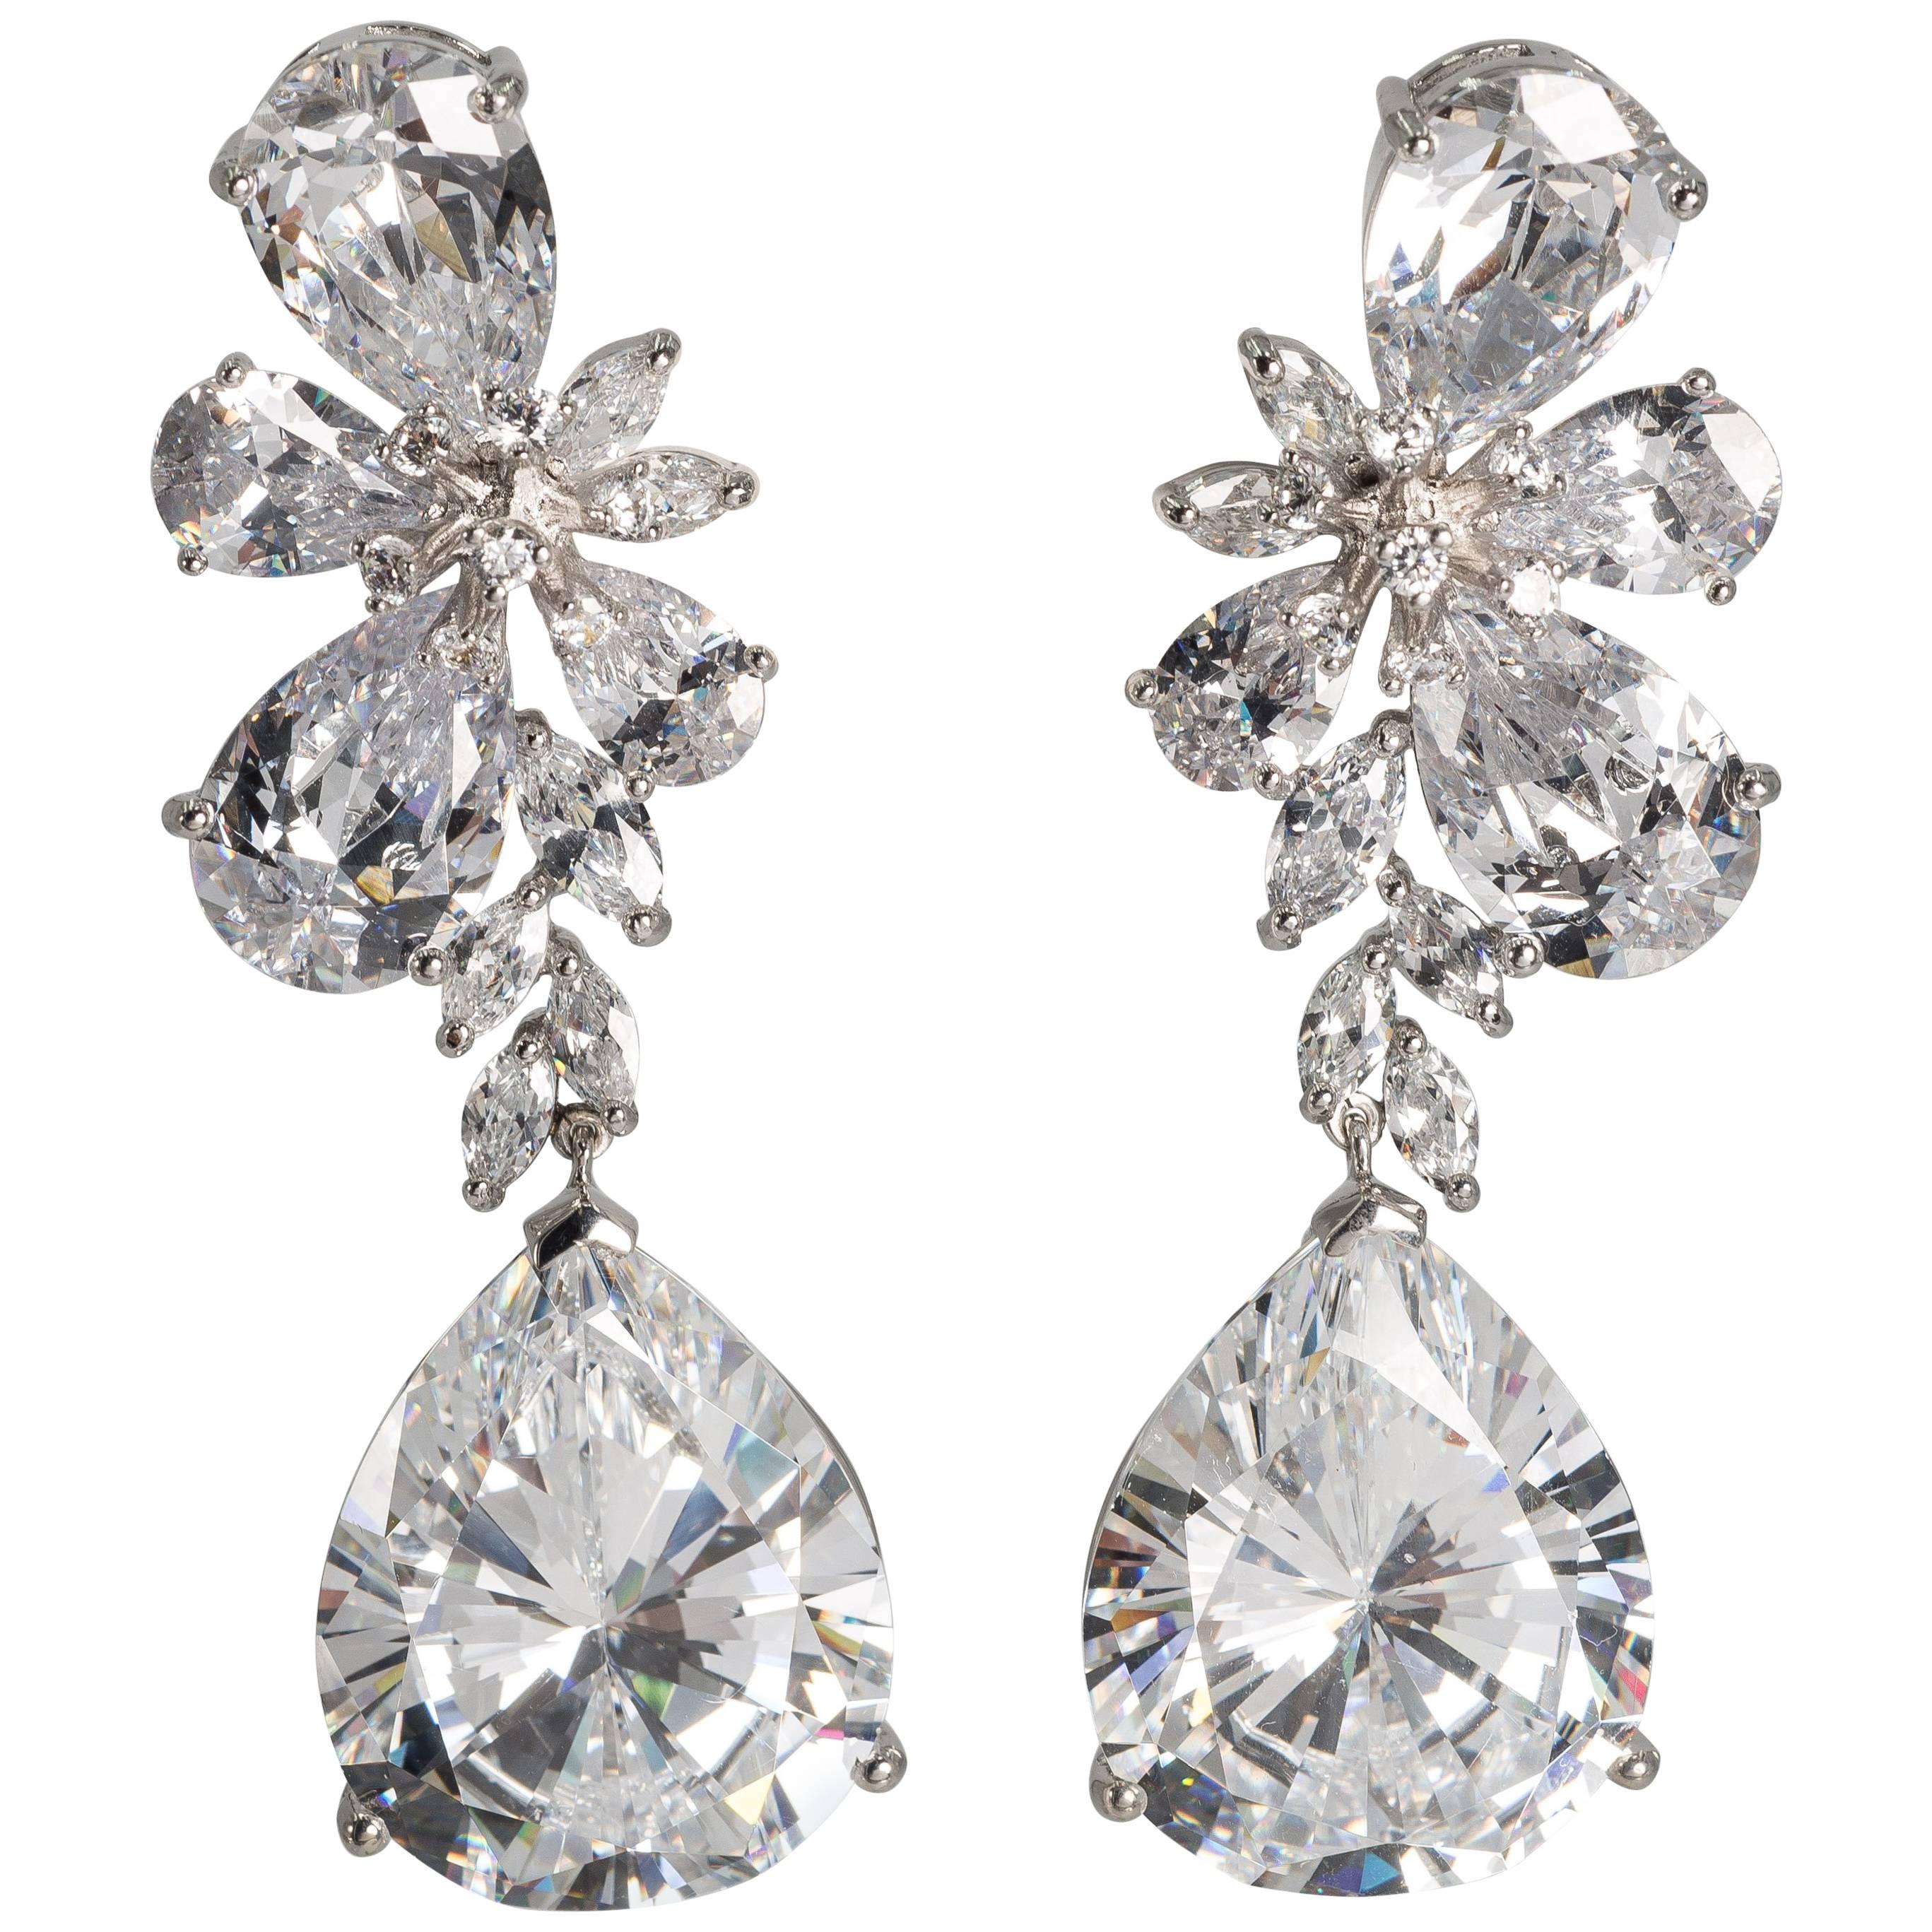 Magnificent Costume Jewelry Large Diamond Earrings